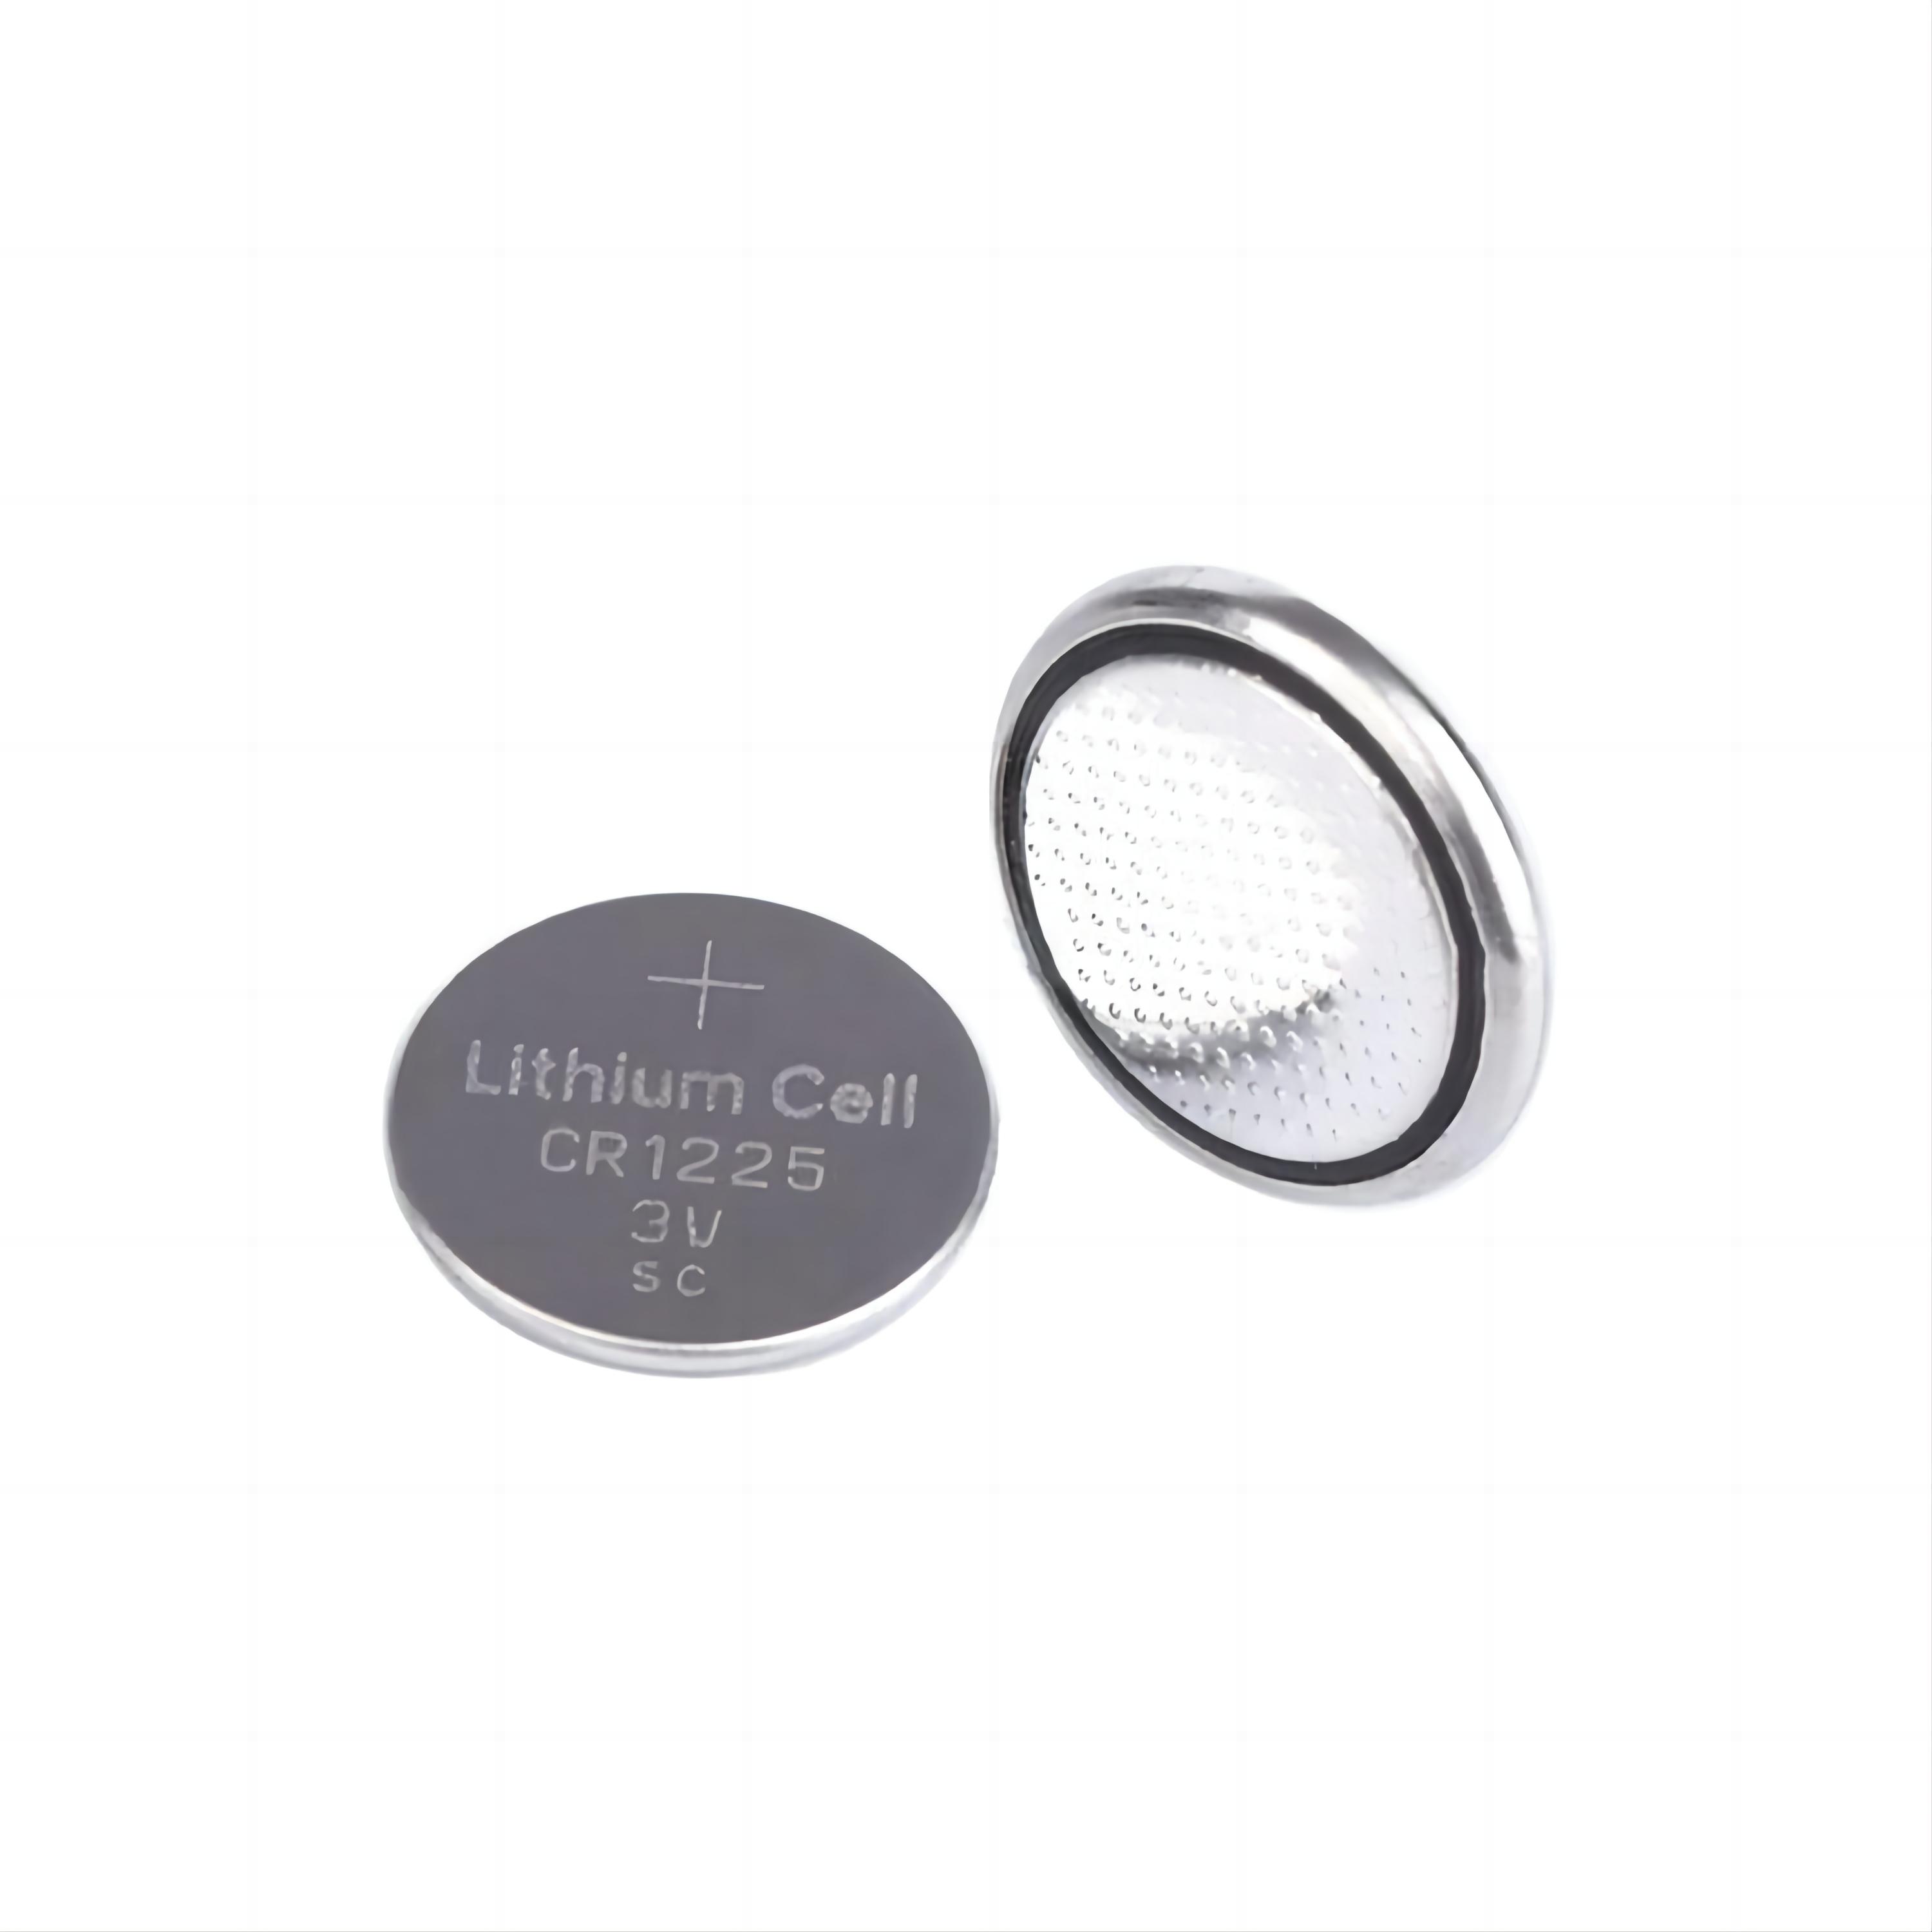 CR1225 Lithium Coin Cell | Weijiang Power